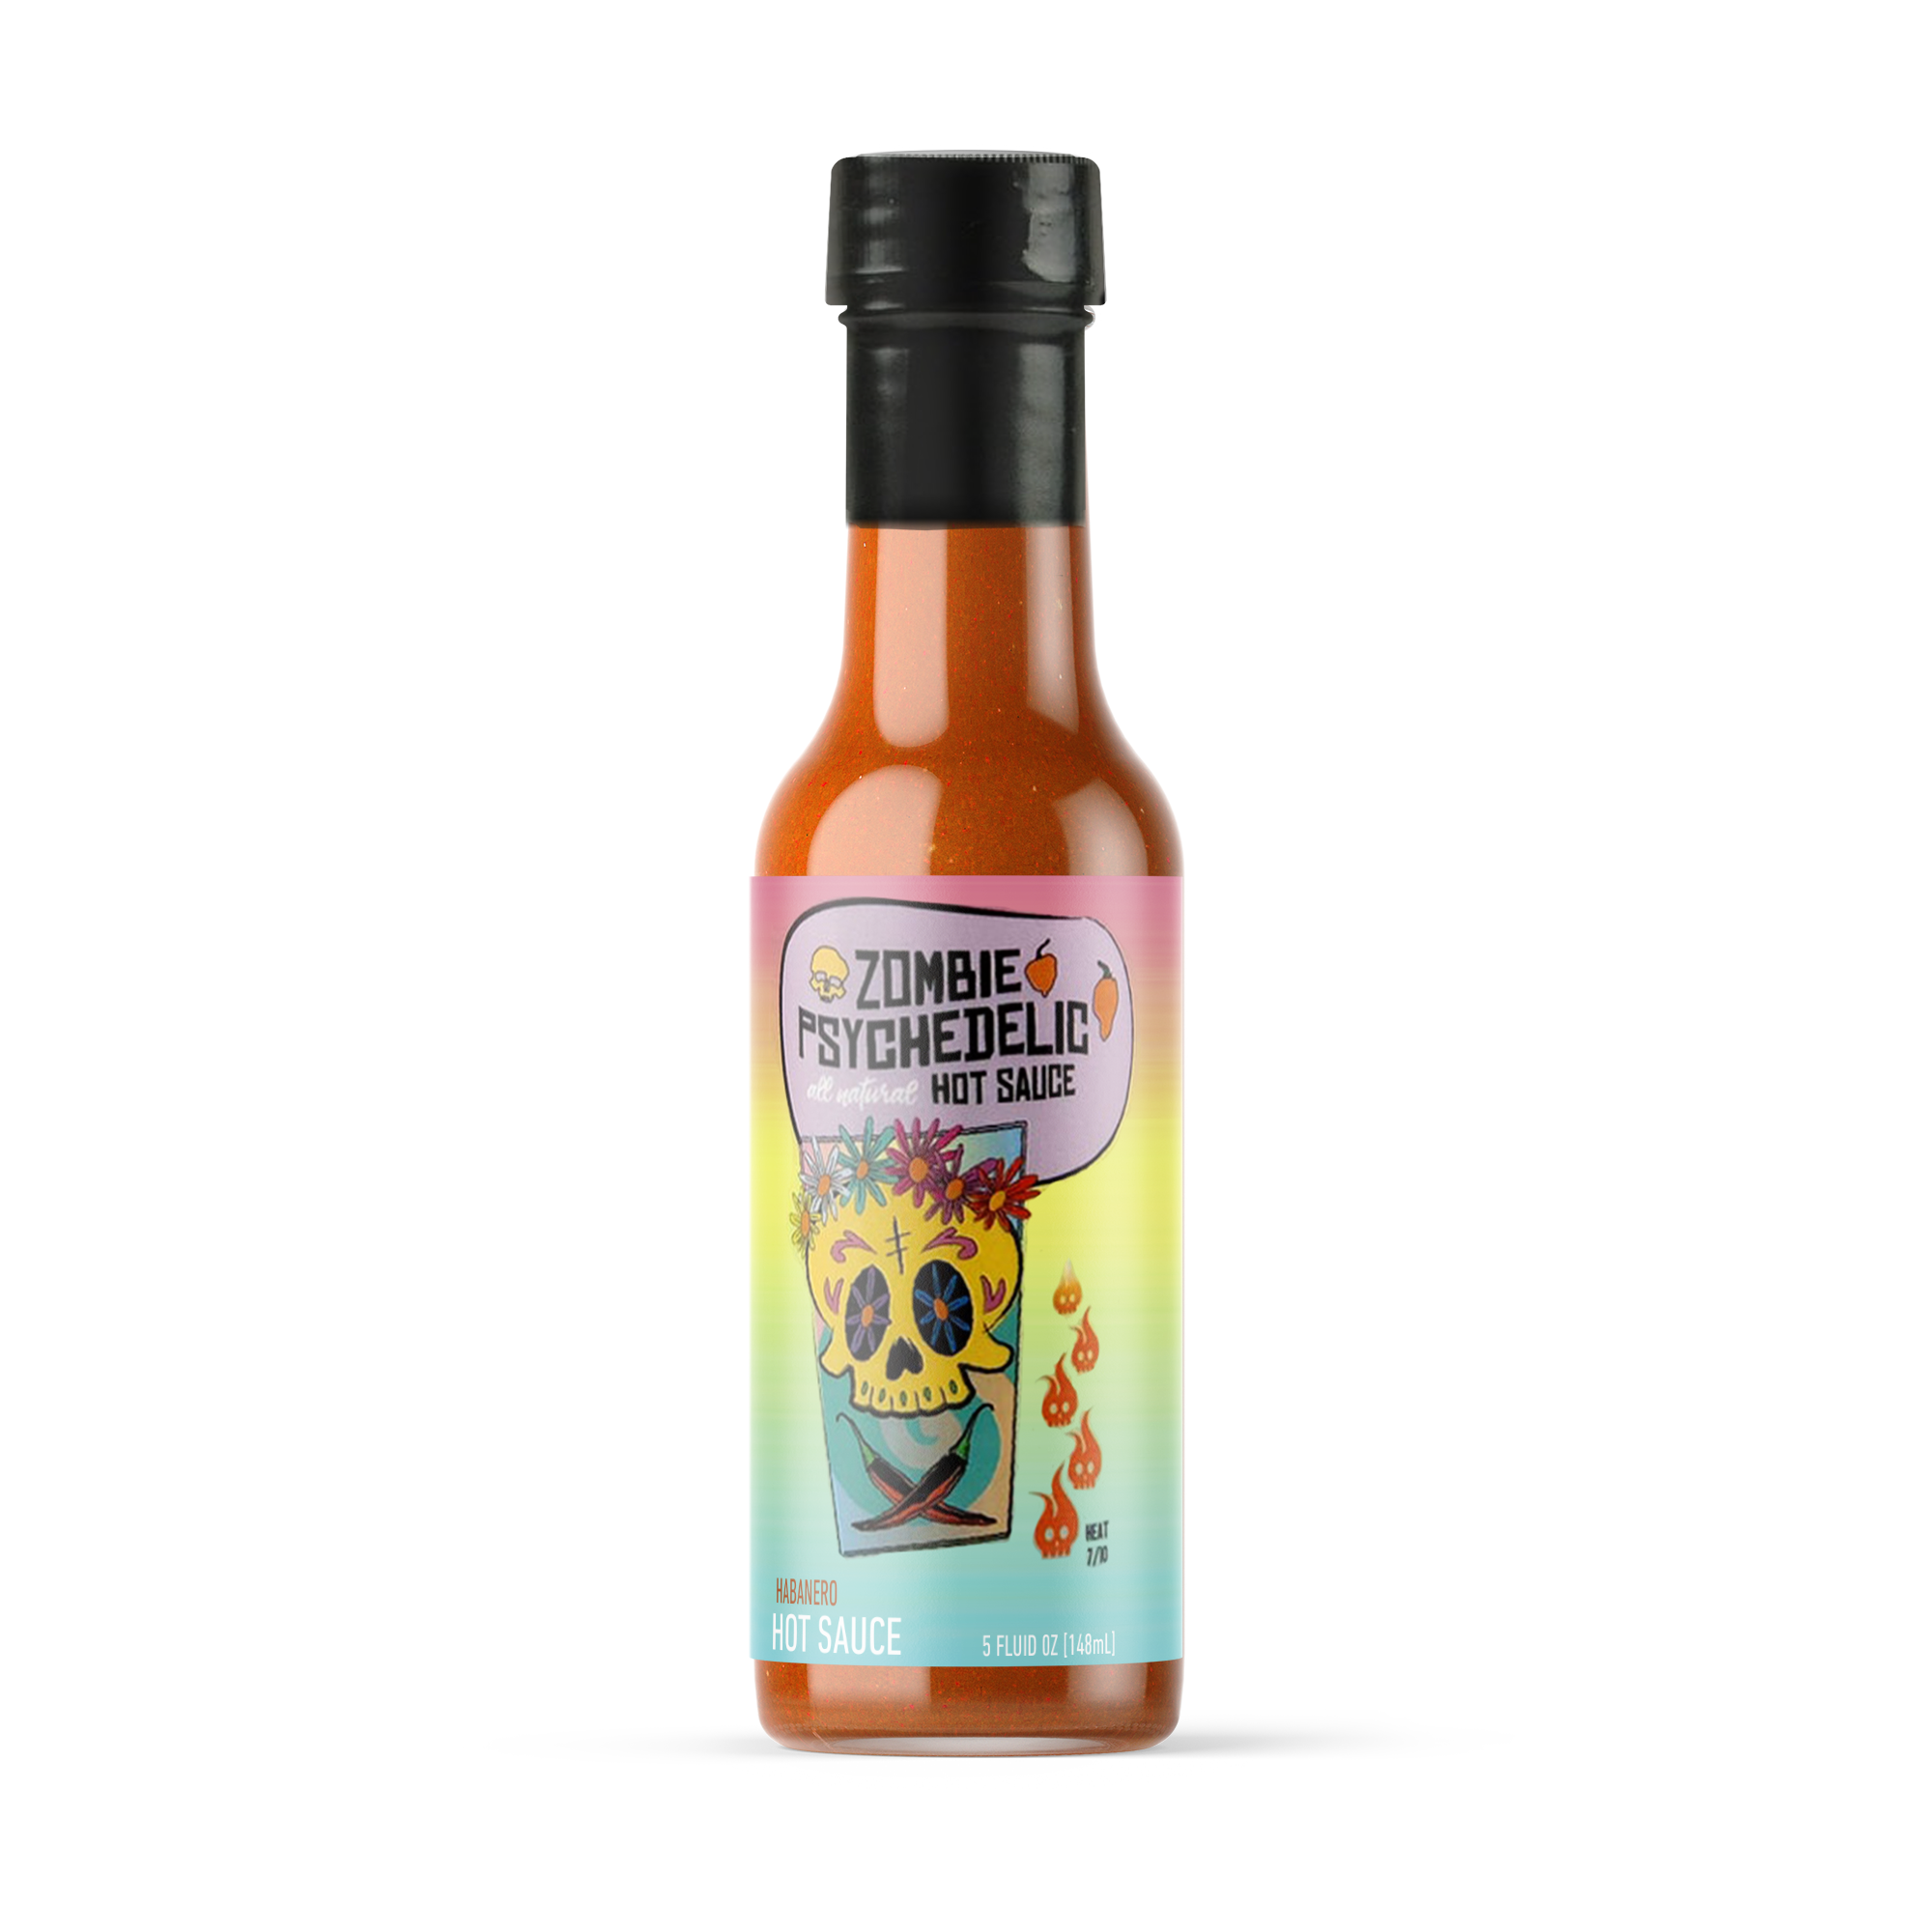 Zombie Psychedelic Hot Sauce 12 CT CASE